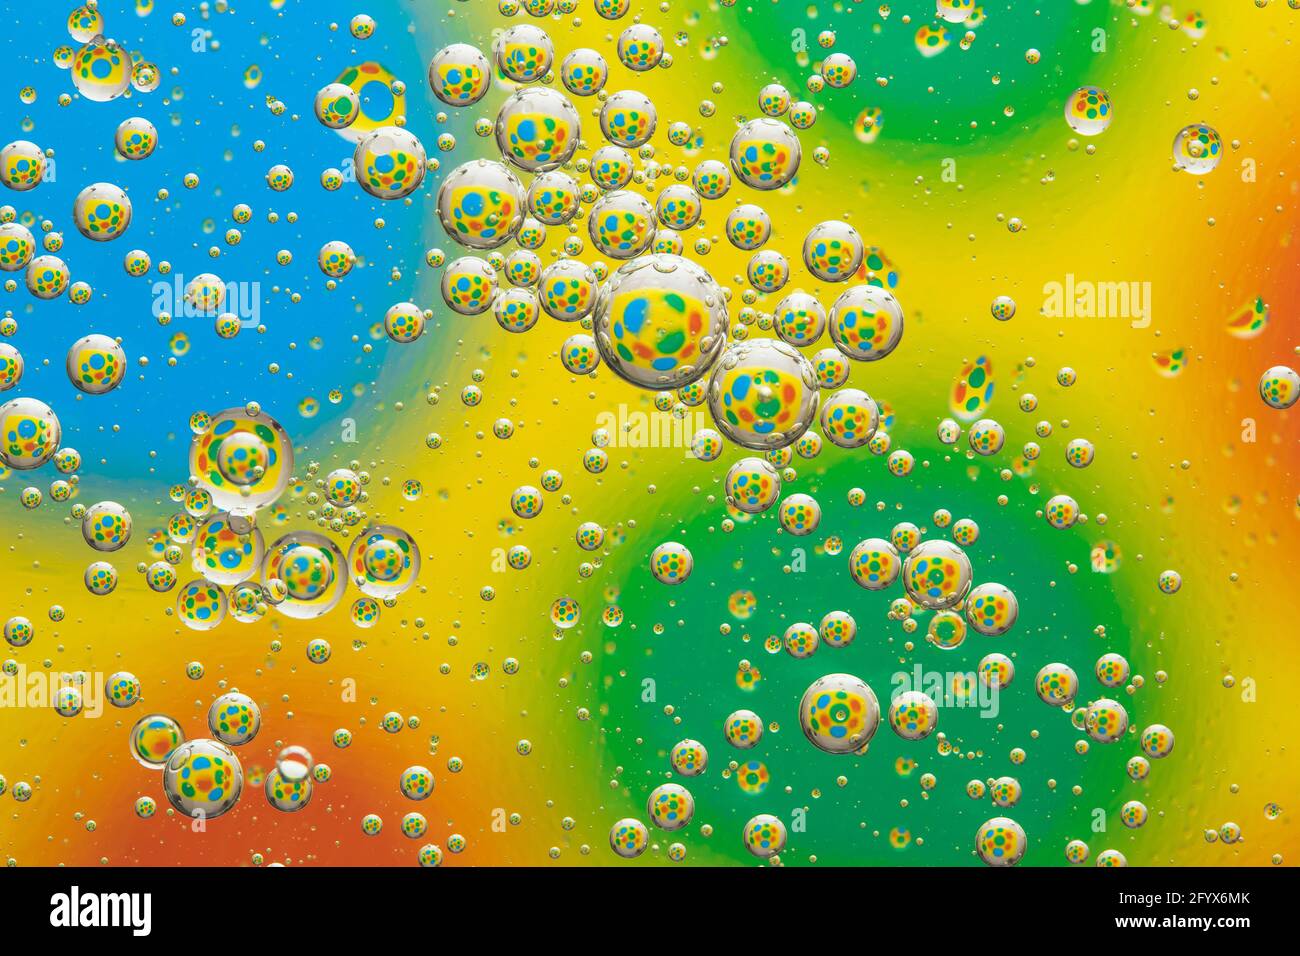 https://c8.alamy.com/comp/2FYX6MK/rainbow-background-with-bubbles-water-drops-texture-abstract-multicolor-circles-pattern-creative-art-design-colorful-liquid-surface-green-and-yel-2FYX6MK.jpg